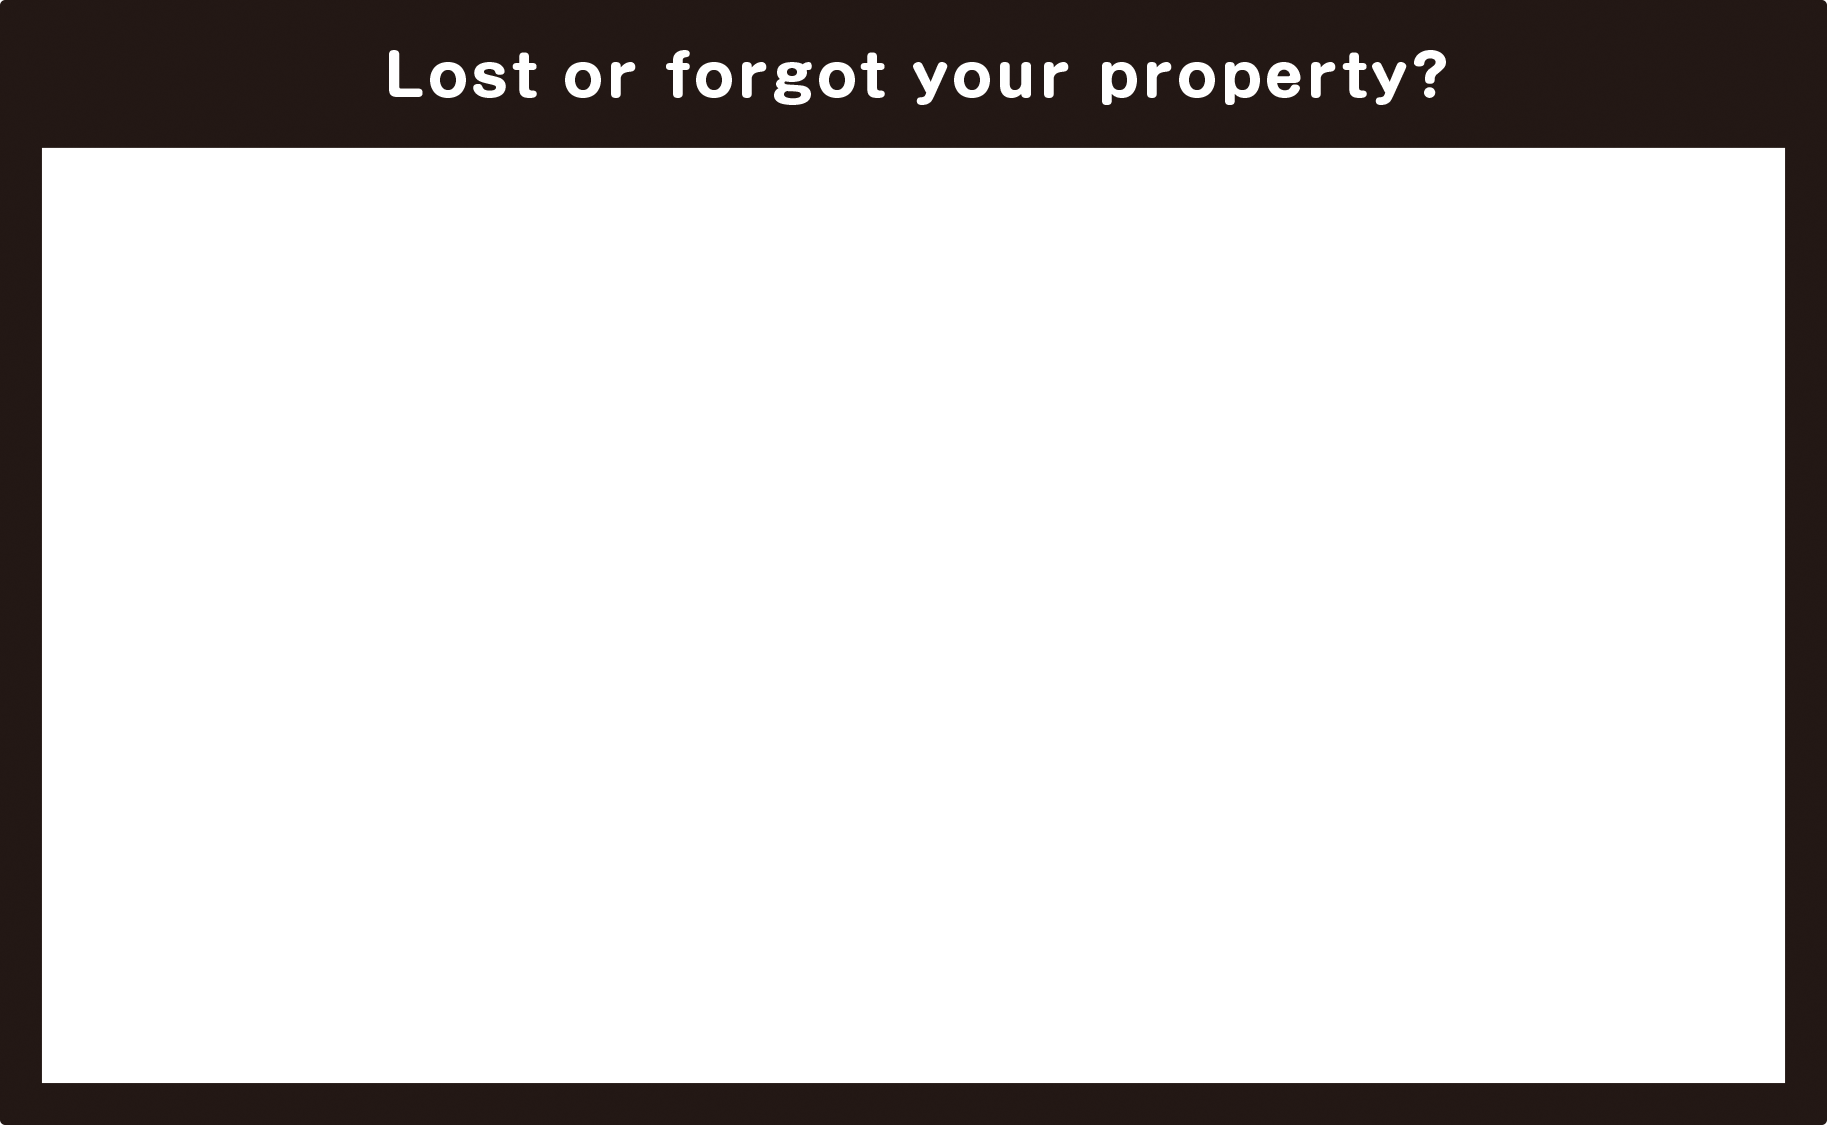 Slideshow[Lost or forgot your property?].See this slide on full screen.